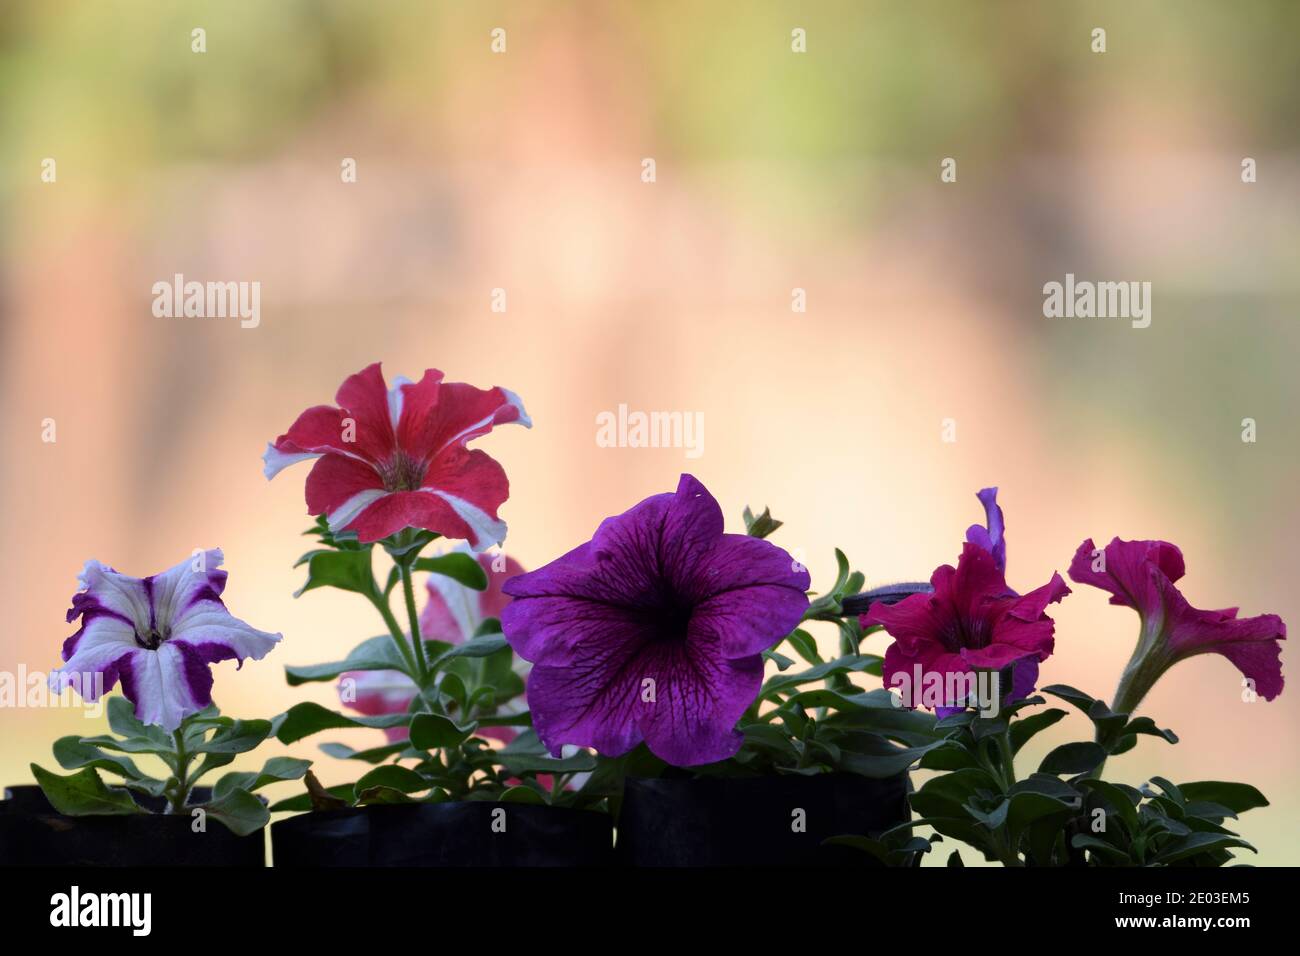 Petunia flowers bunch plant in black container bags multiple with blurred background. Stock Photo